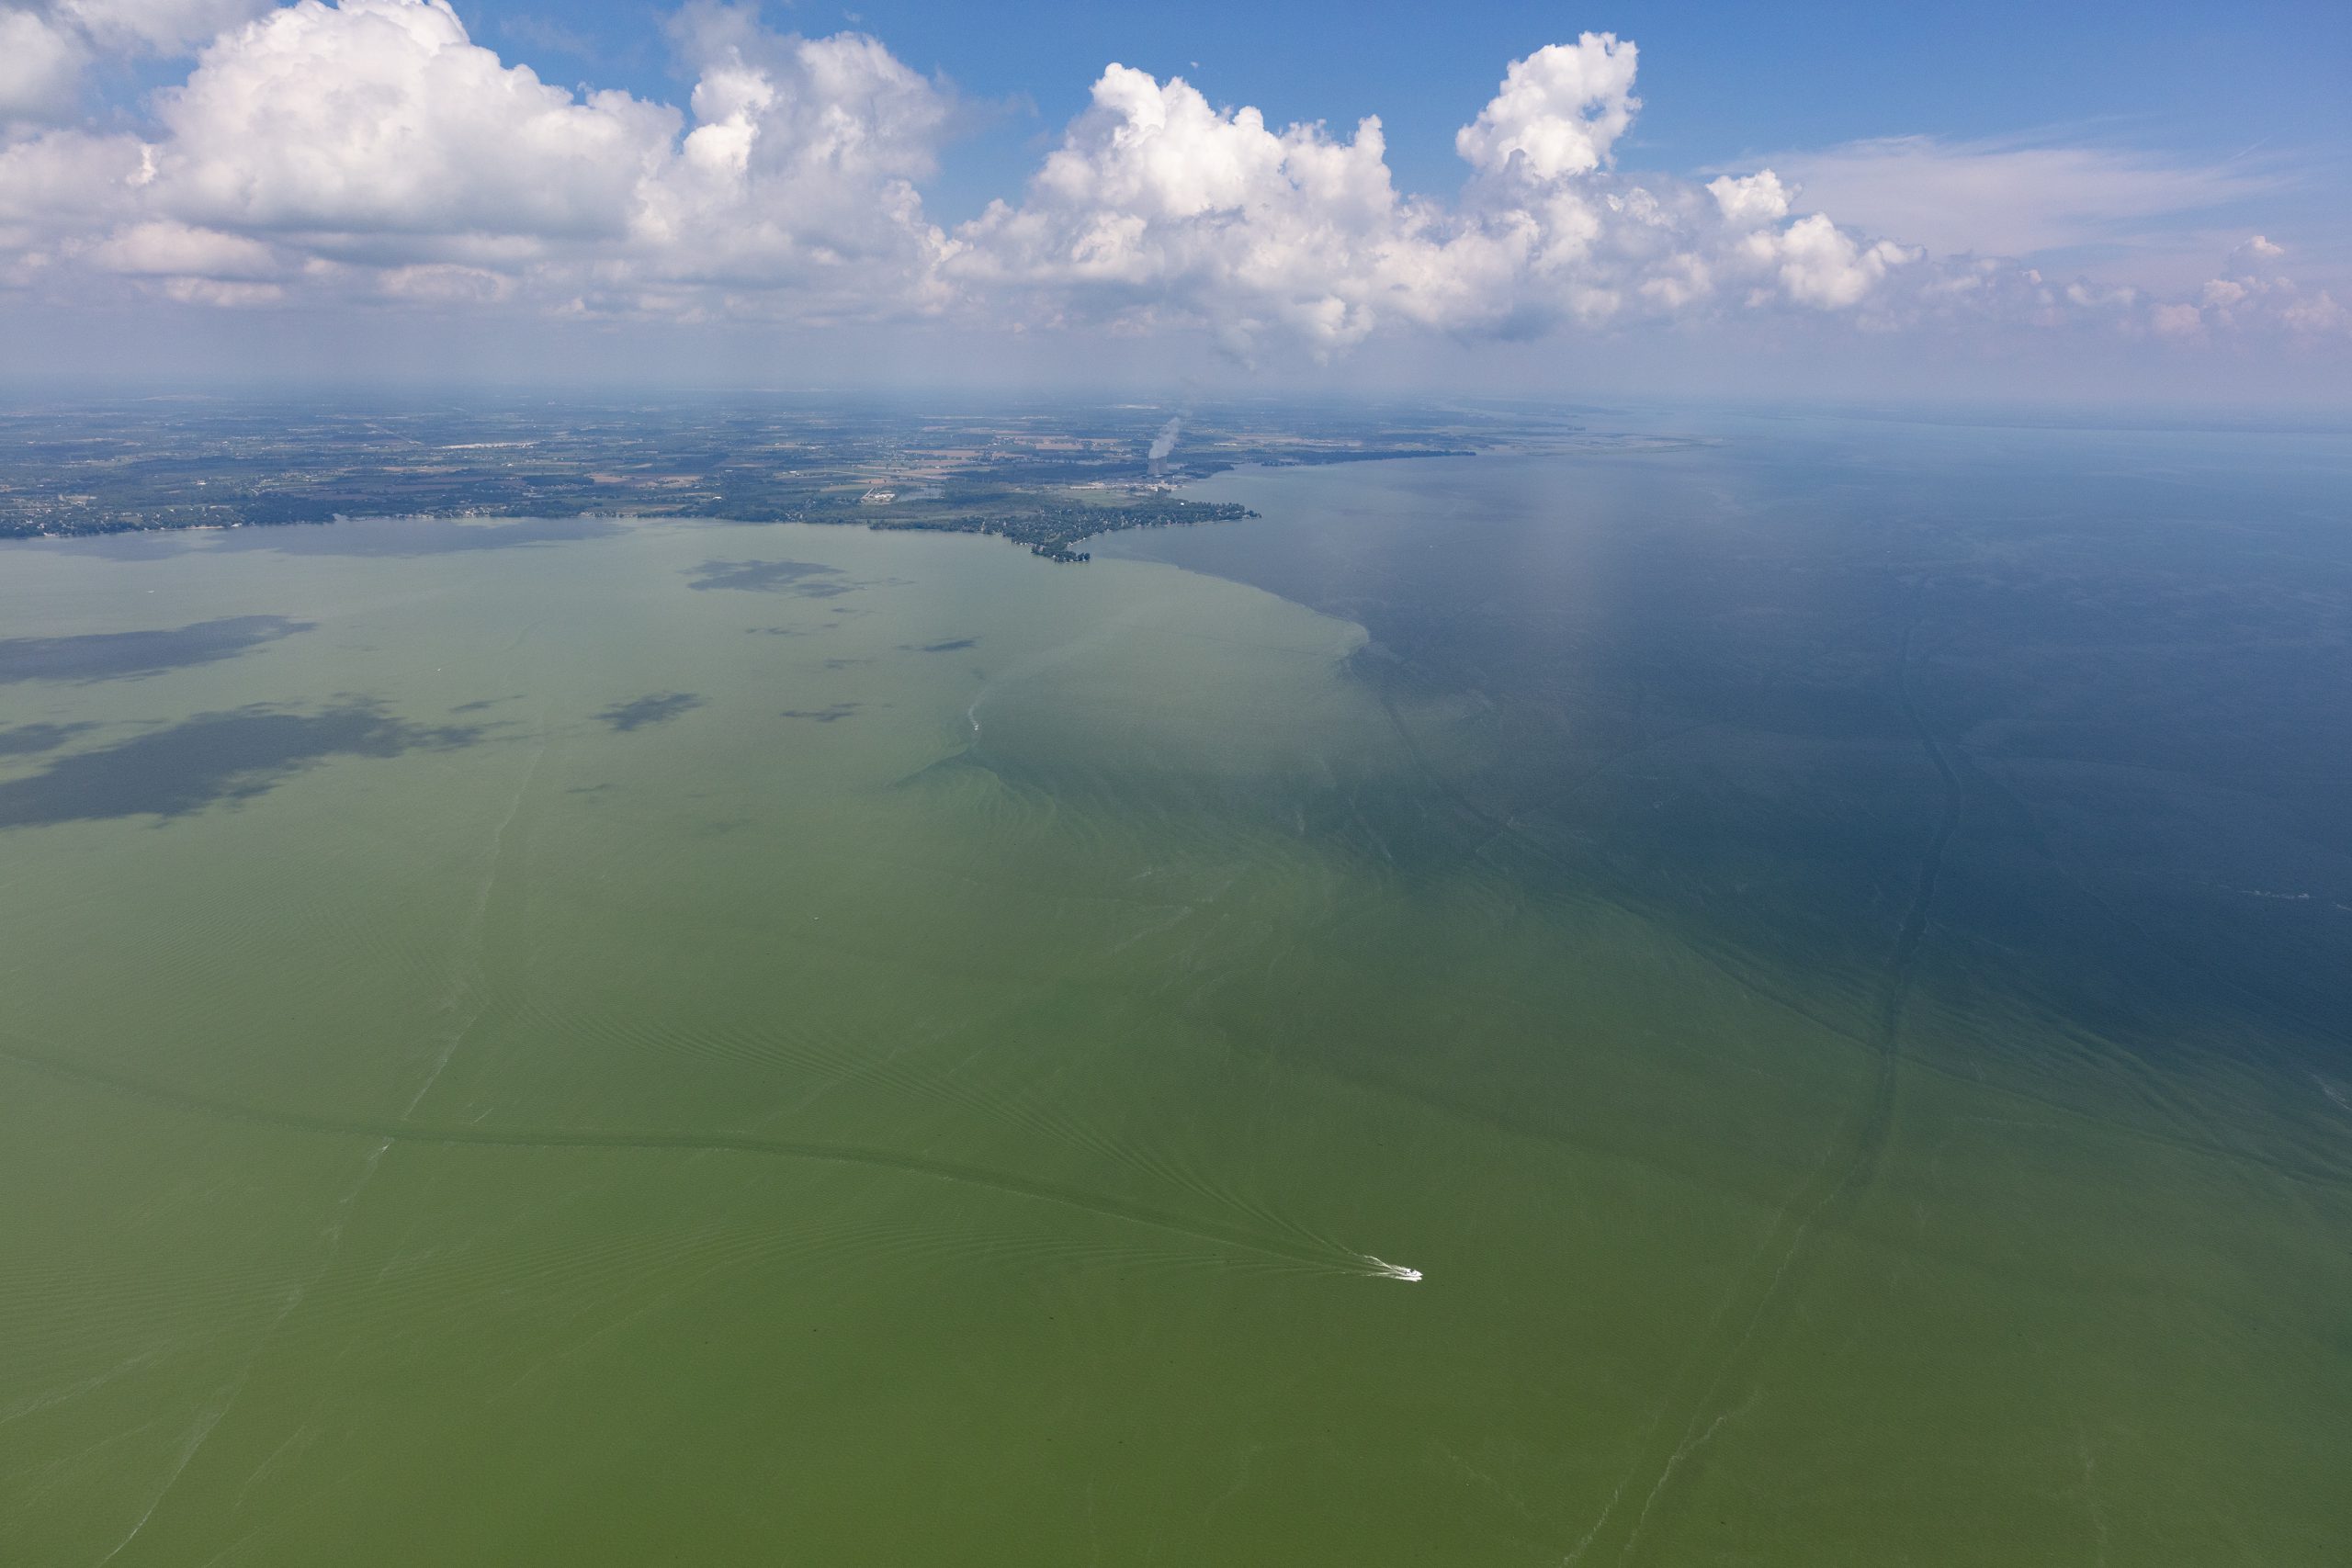 aerial view of green water in a large body of water. Land is in the distance